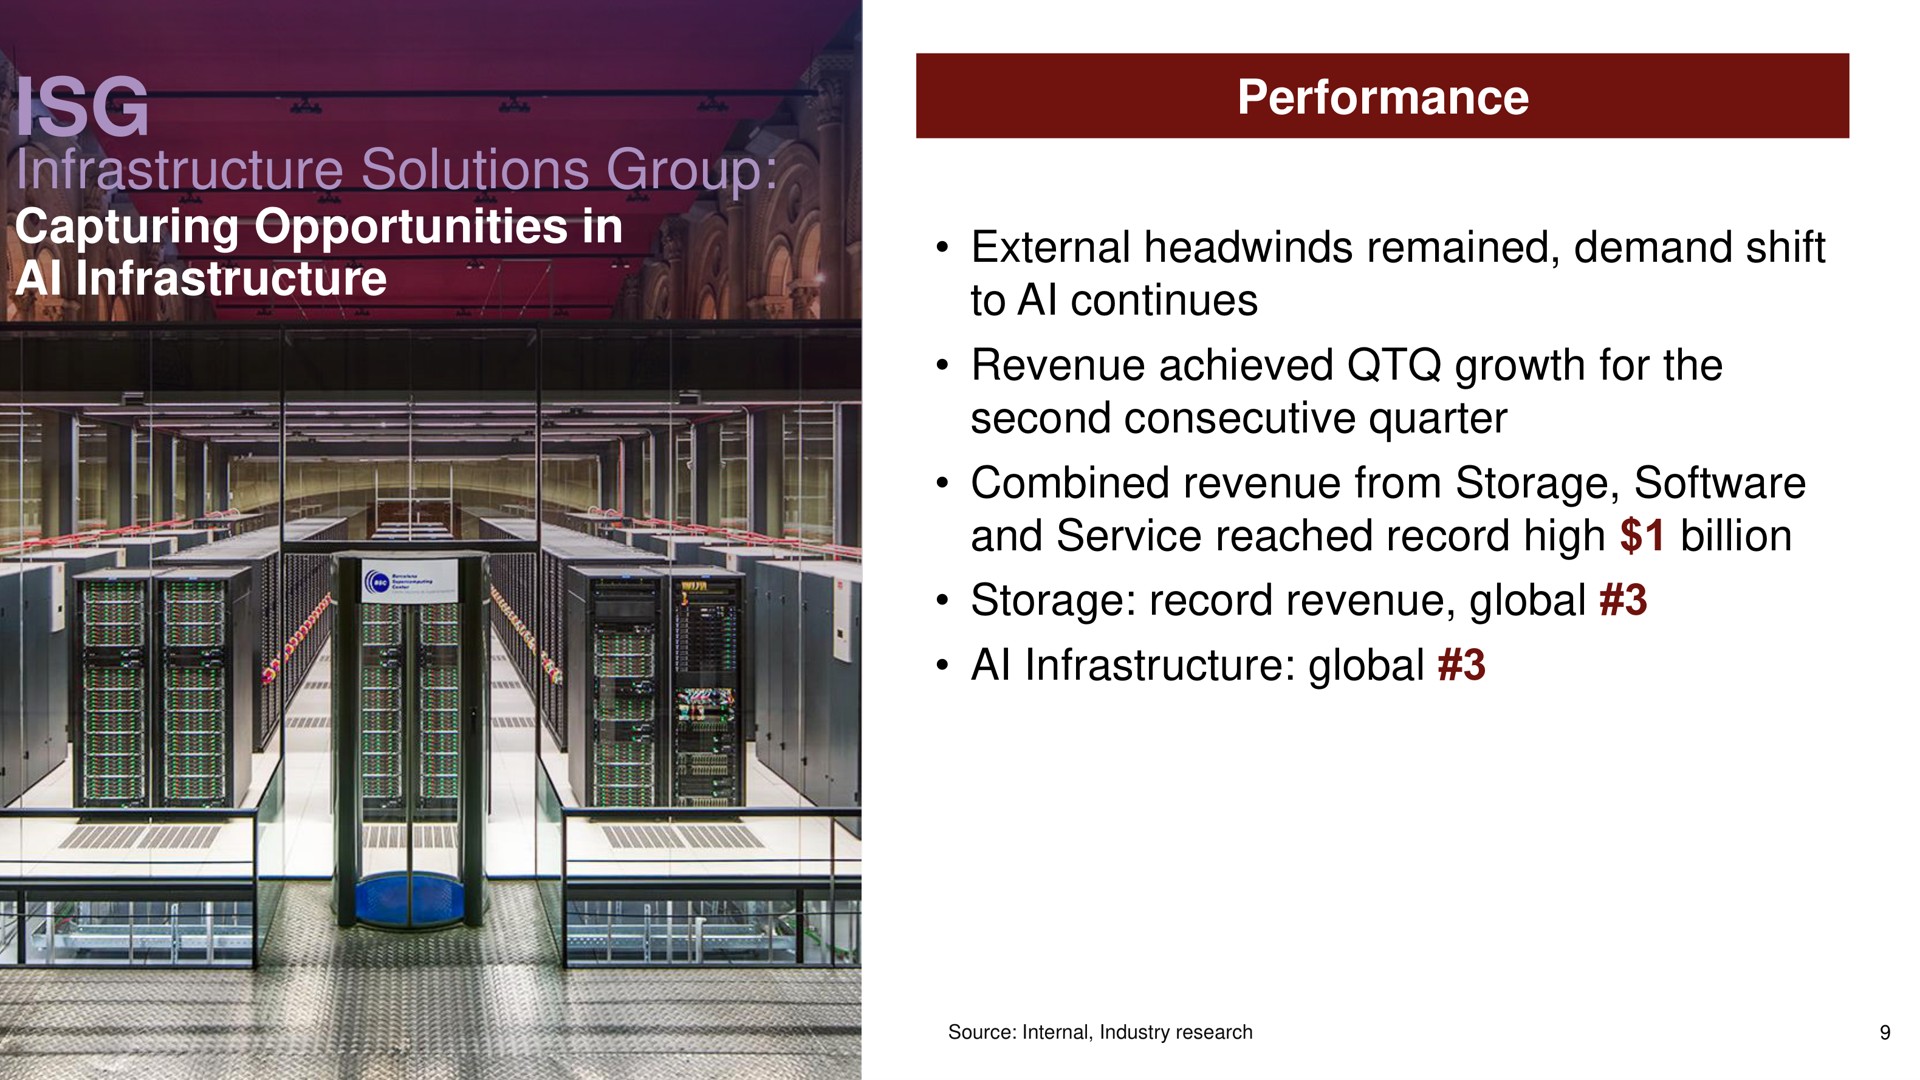 infrastructure solutions group capturing opportunities in infrastructure performance external remained demand shift to continues revenue achieved growth for the combined revenue from storage and service reached record high billion global | Lenovo